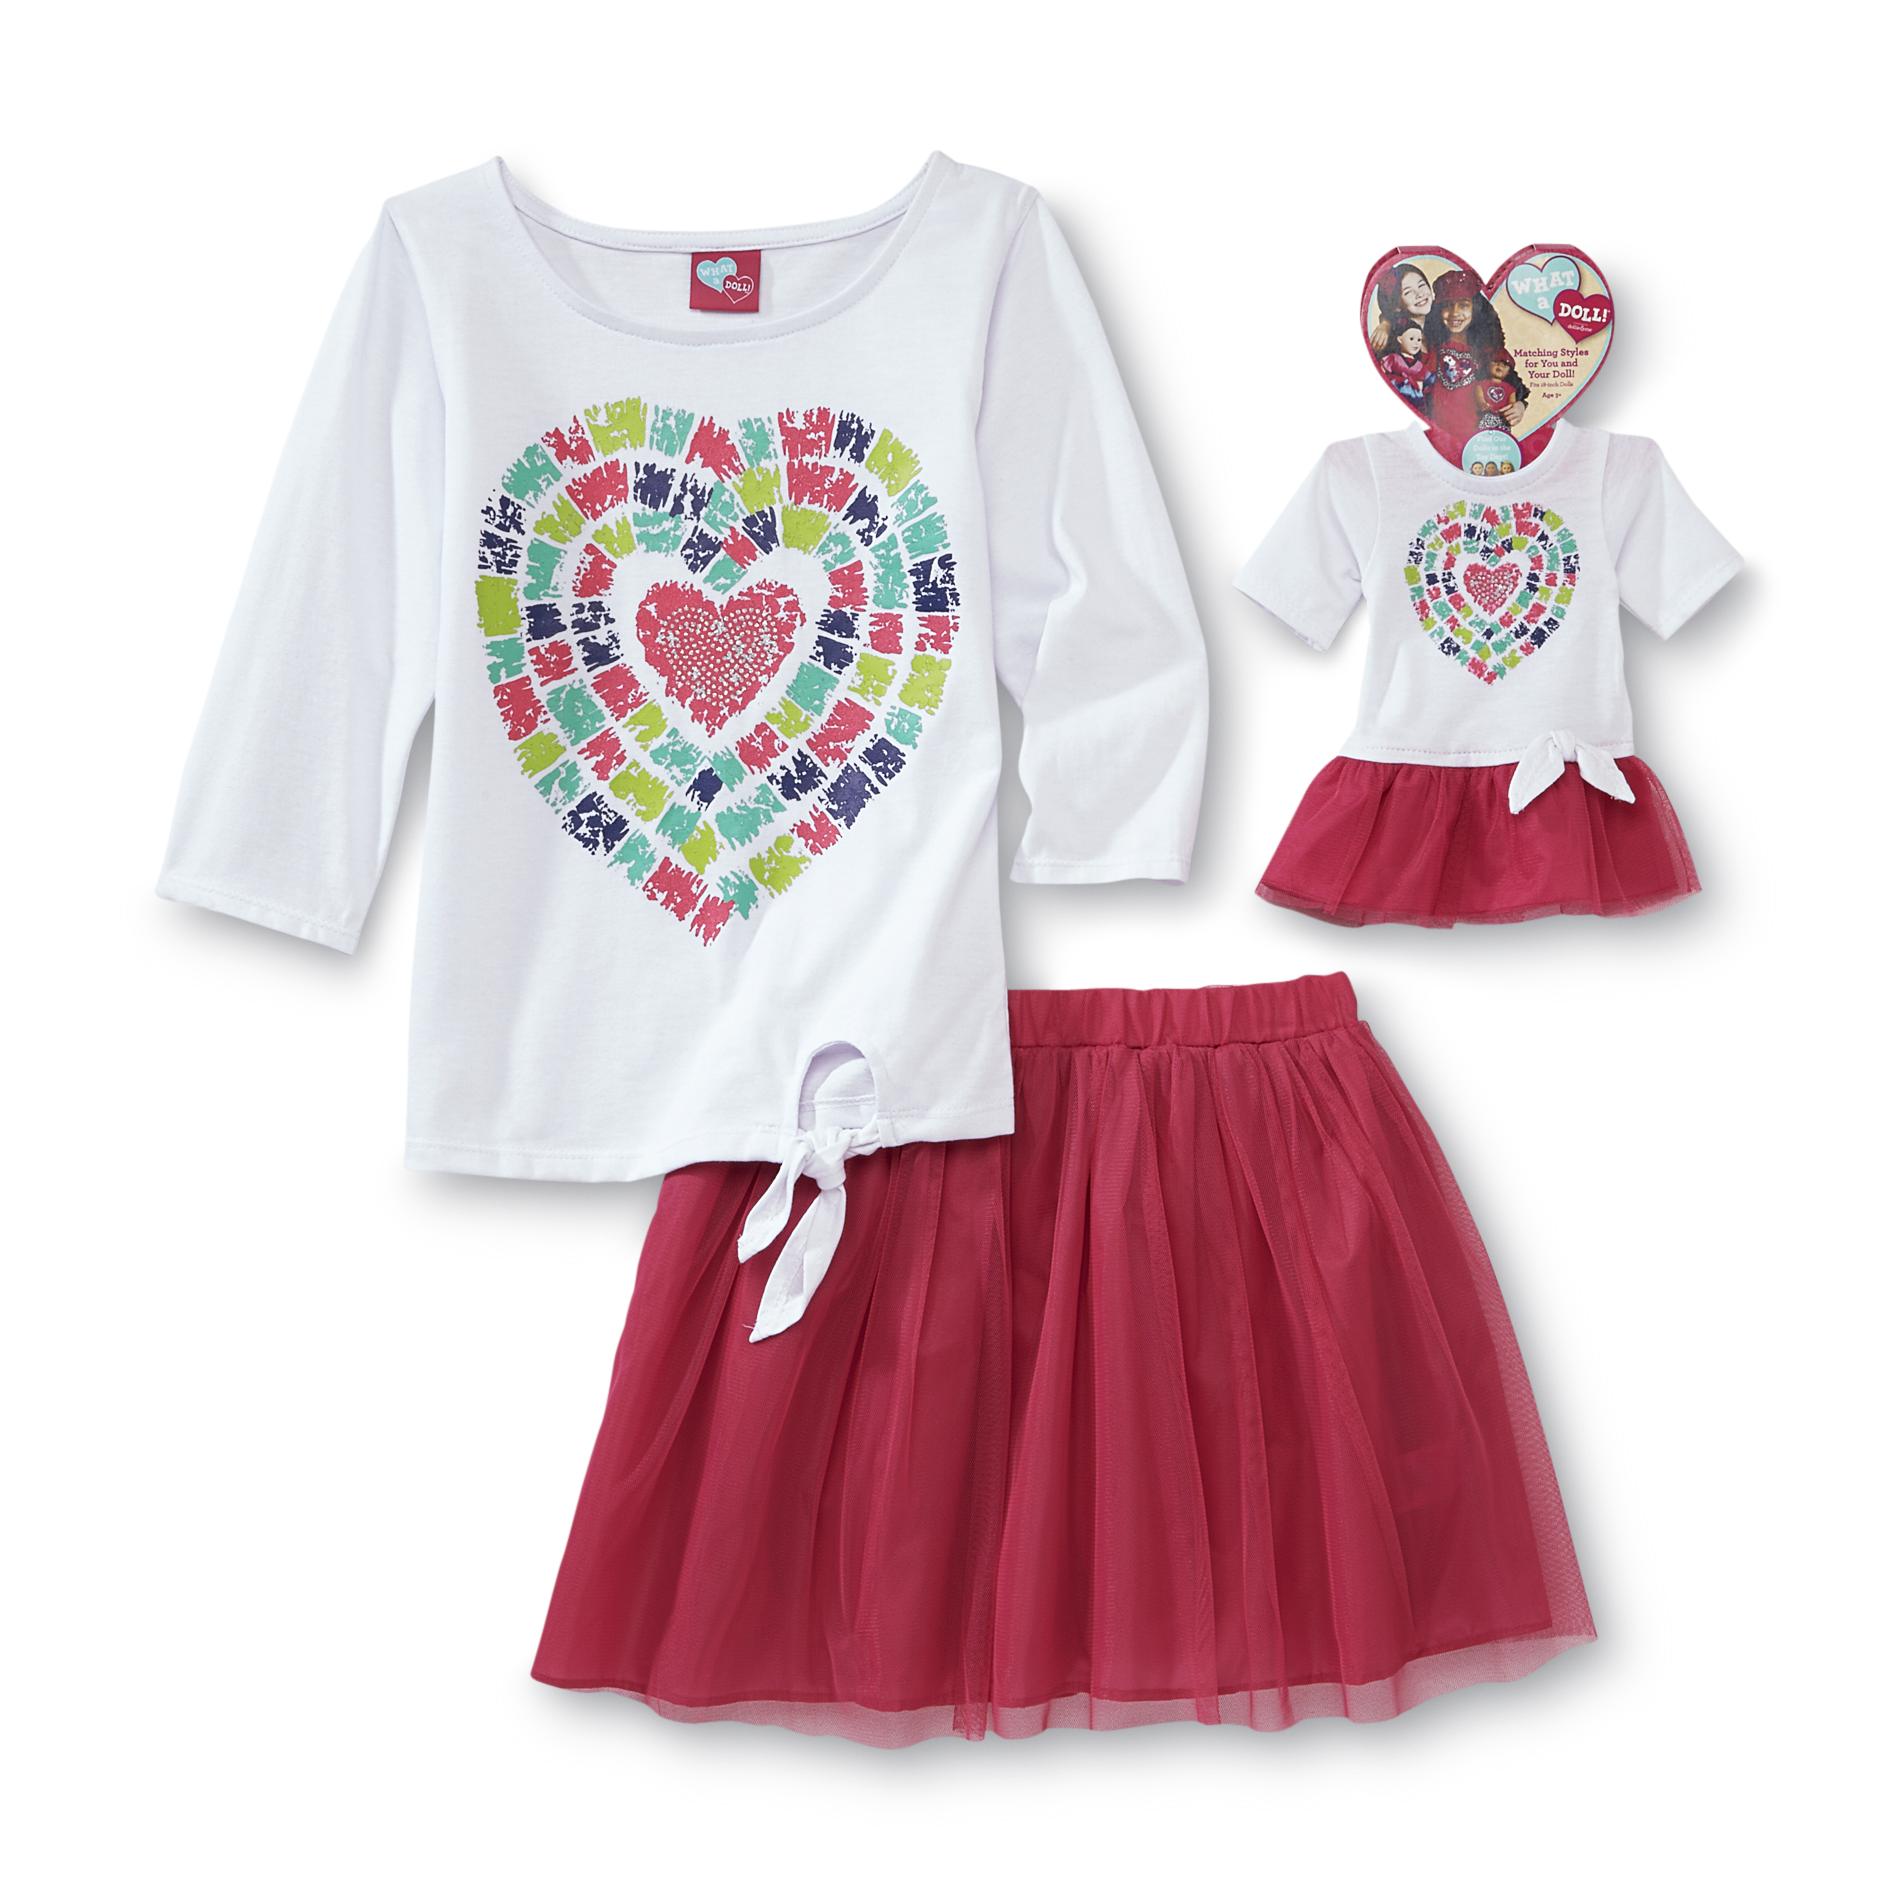 What A Doll Girl's Top  Scooter Skirt & Matching Doll Outfit